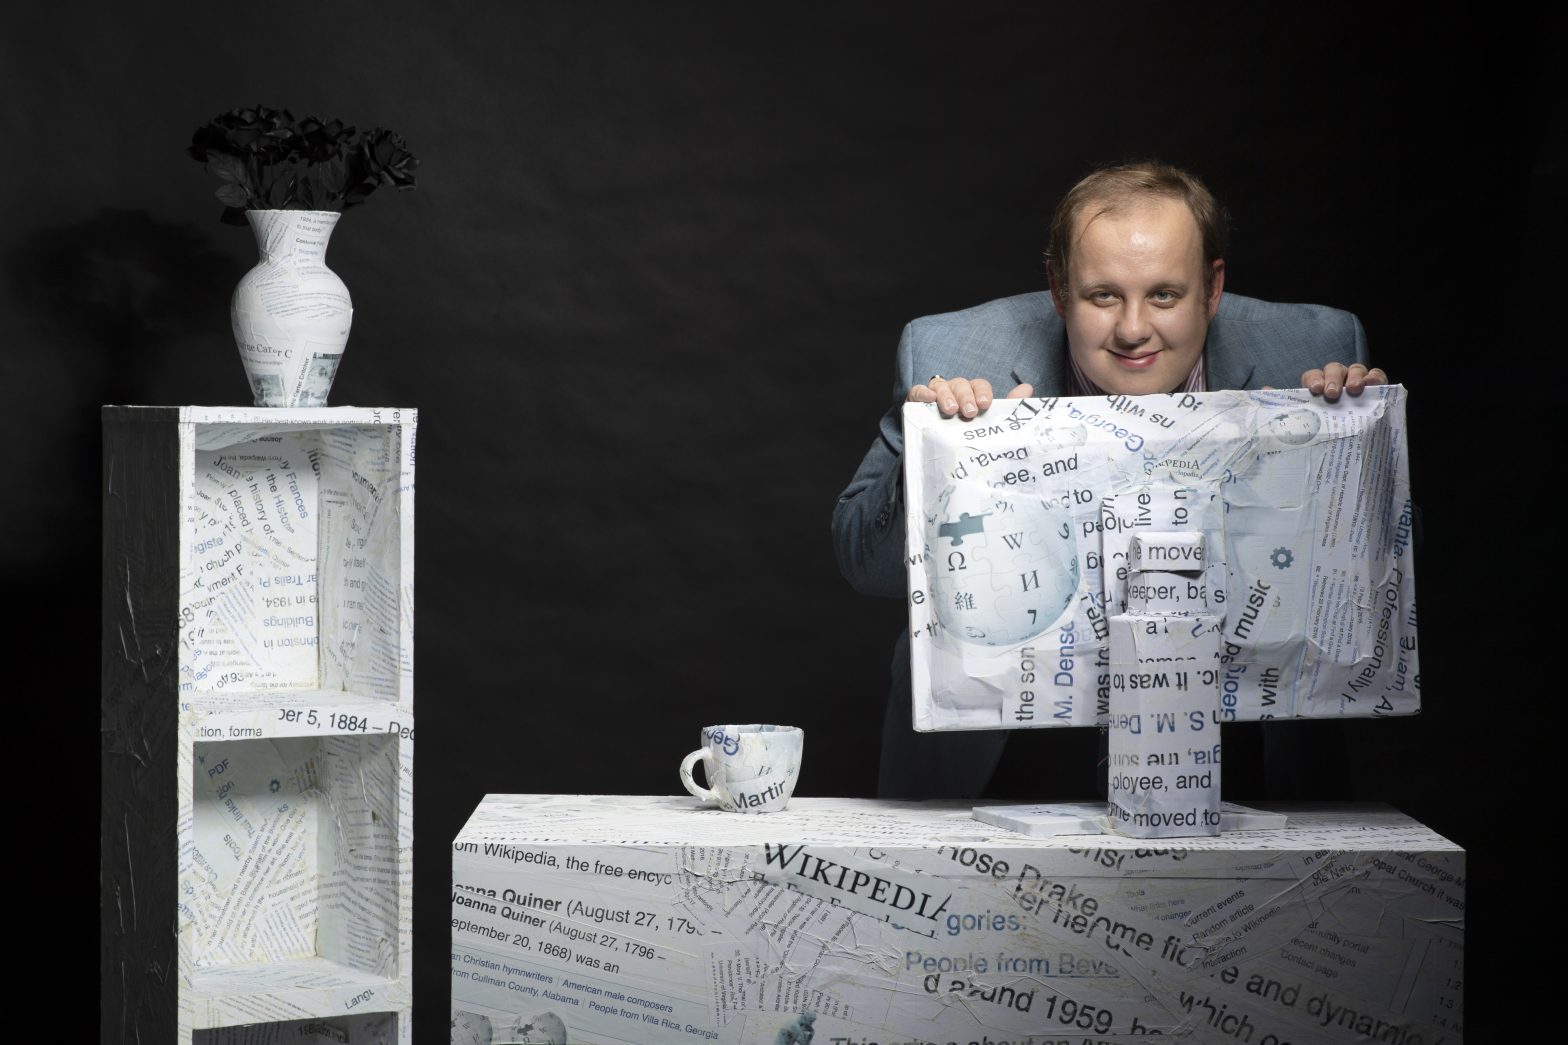 A photo of Steven Pruitt leaning over a computer monitor wrapped in Wikipedia branded paper.